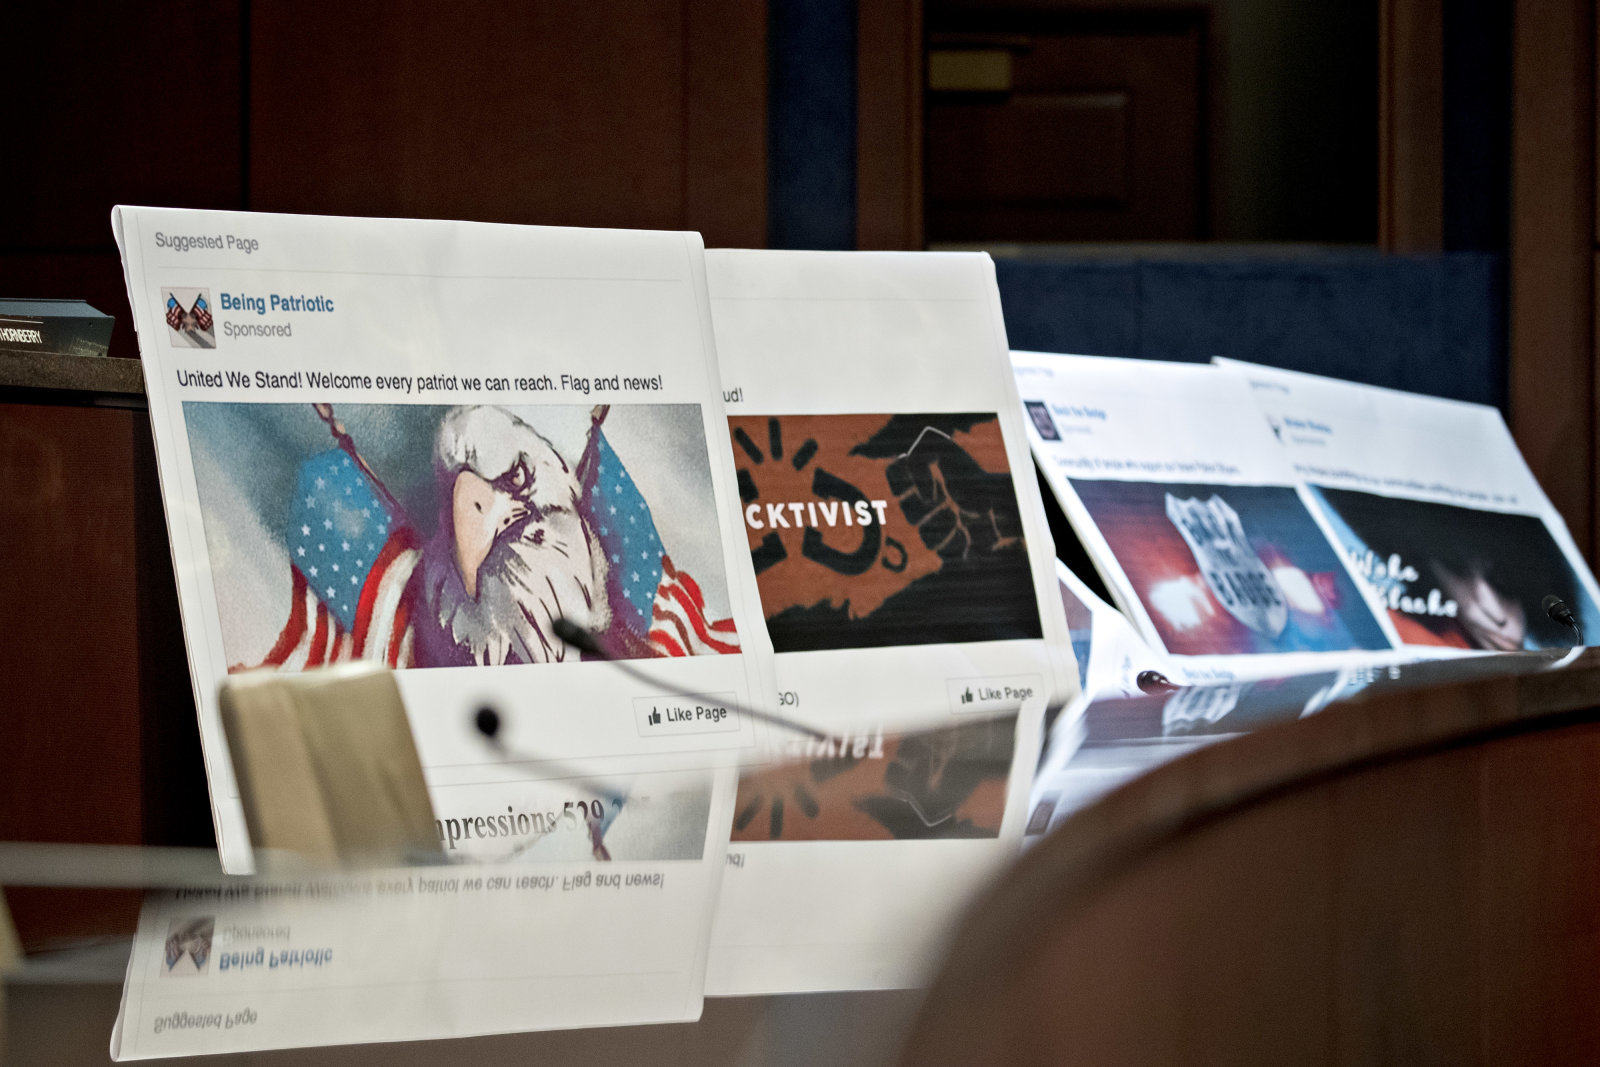 Displays showing social media posts are seen during a House Intelligence Committee hearing in Washington, D.C., U.S., on Wednesday, Nov. 1, 2017. The top Democrat on the Senate Intelligence Committee berated lawyers today for social media giants Facebook, Twitter and Google for a lethargic response to Russian interference in U.S. politics, as the companies' lawyers faced a second day of grilling in Congress. Photographer: Andrew Harrer/Bloomberg via Getty Images